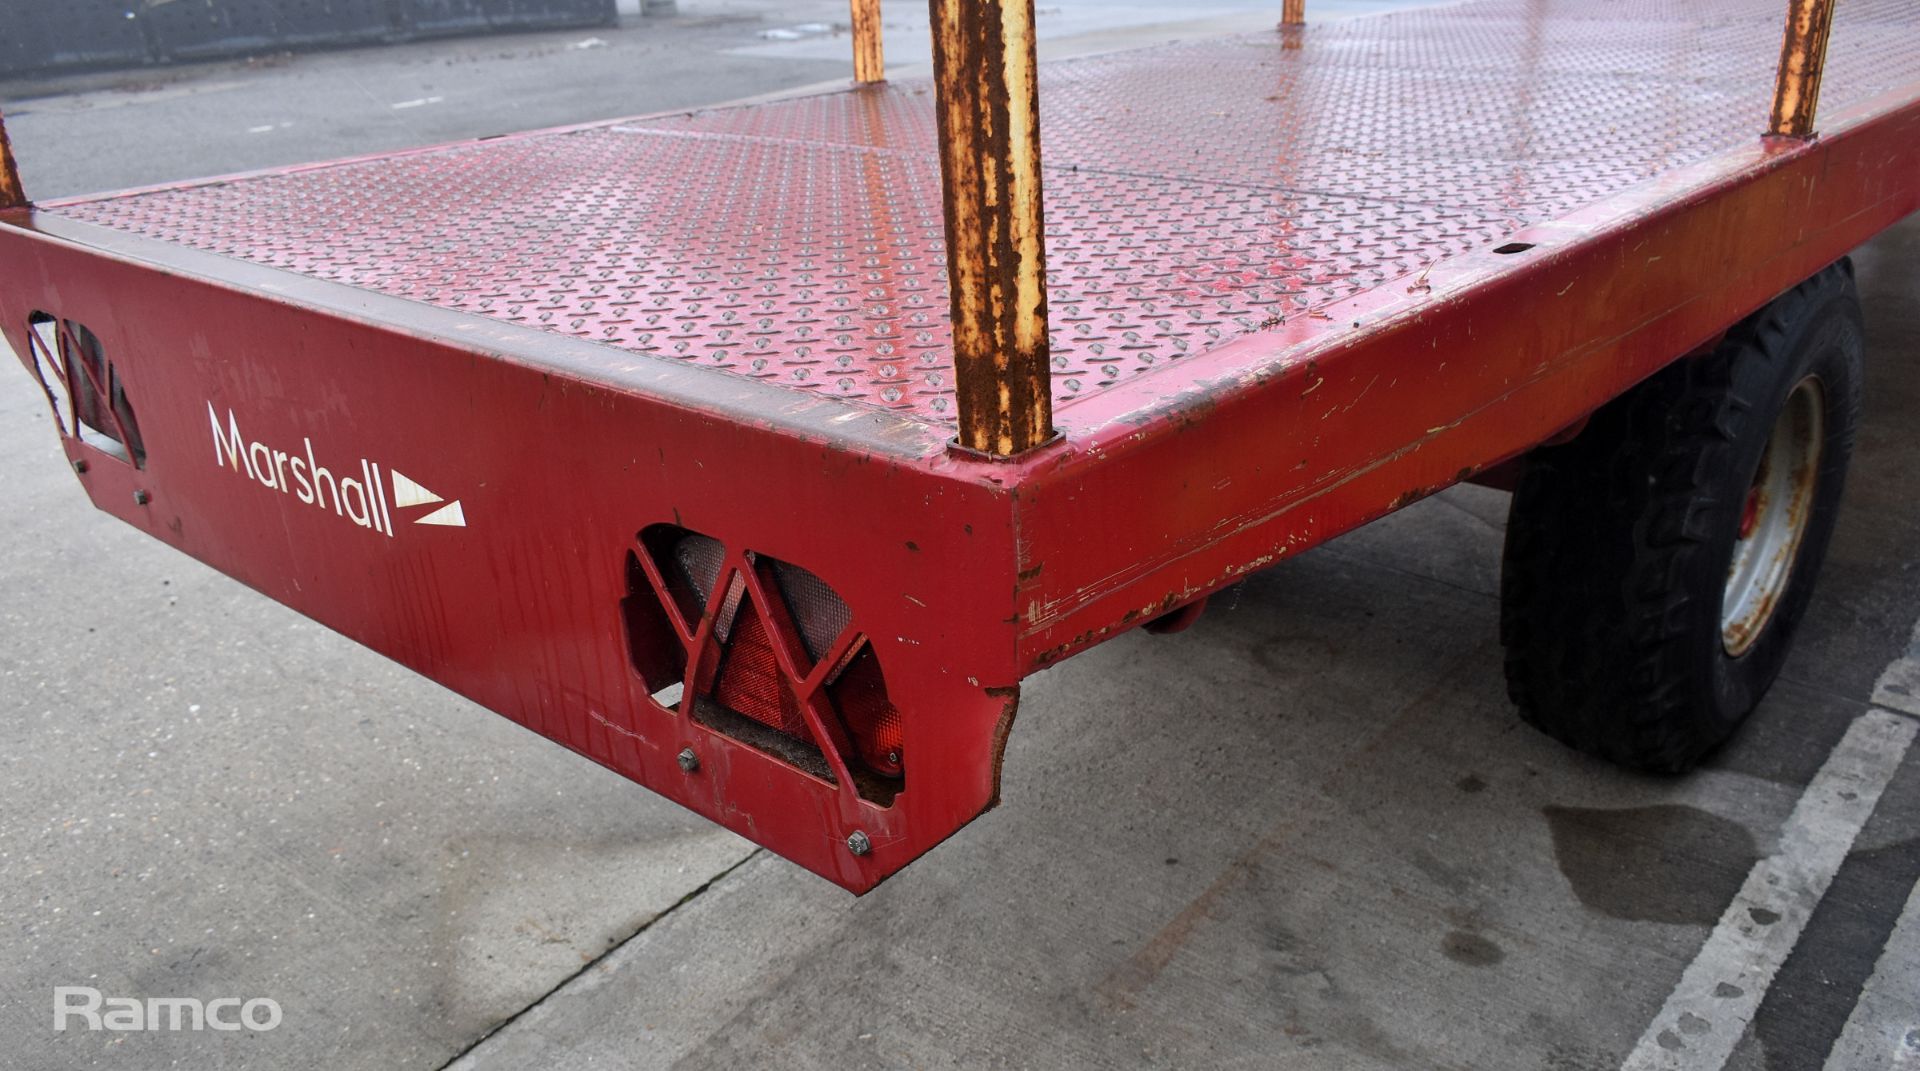 Marshall BC18N 2019 single axle flatbed trailer - 5000kg carrying capacity - serial number 107531 - Image 12 of 12